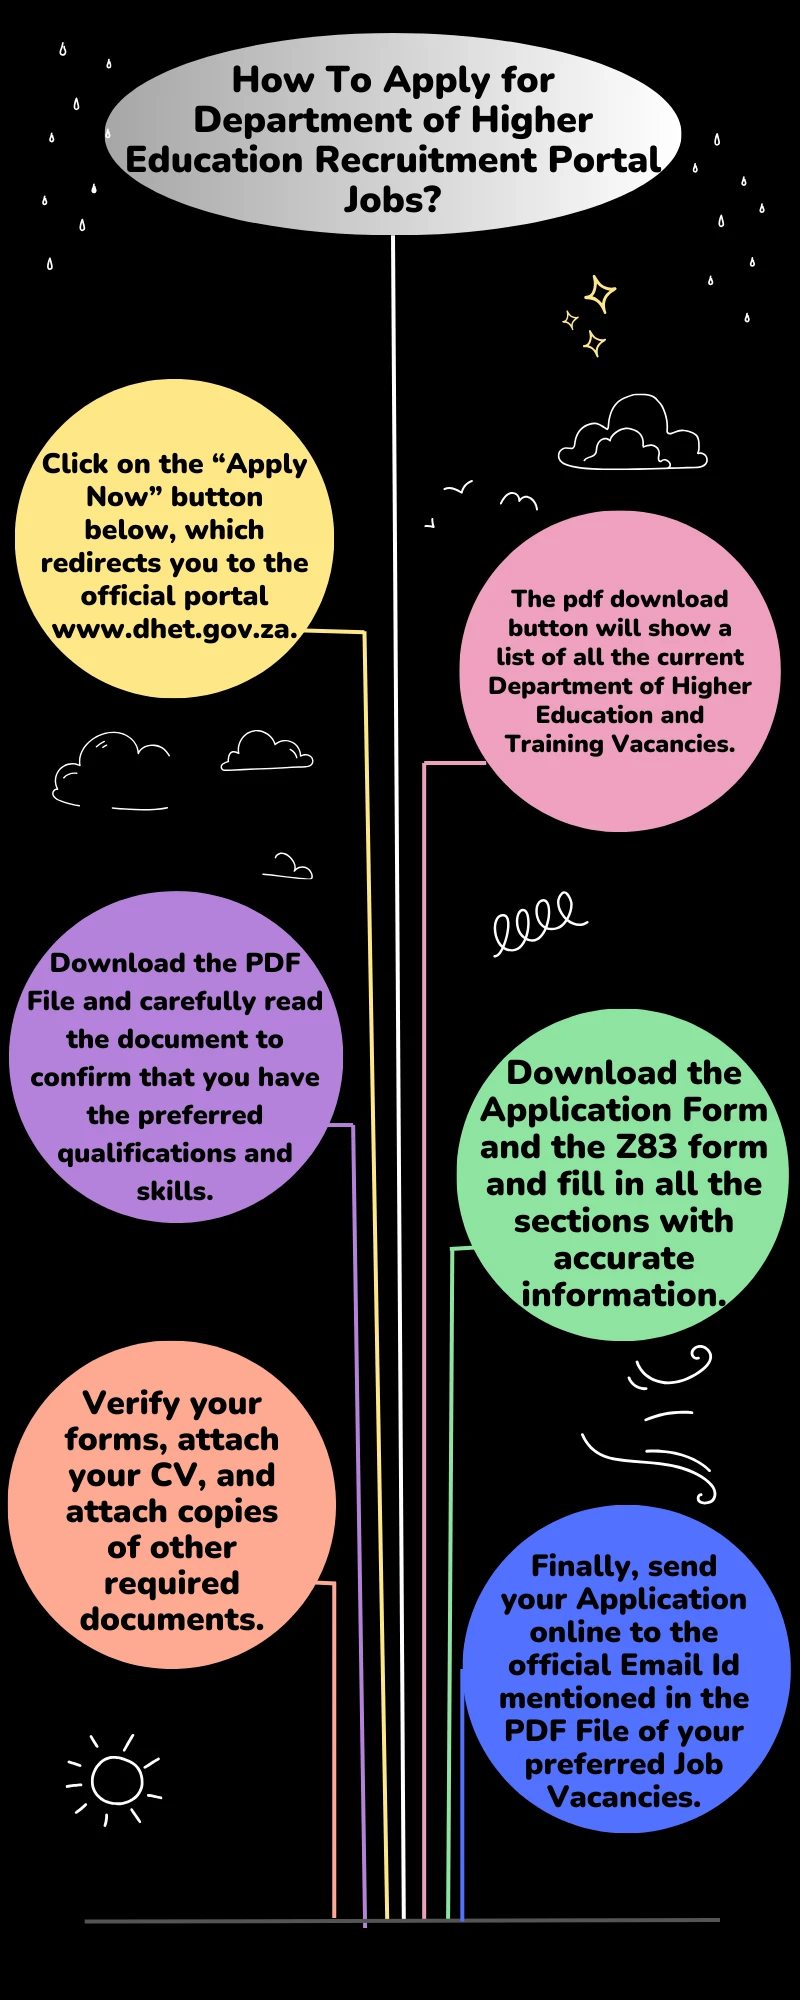 How To Apply for Department of Higher Education Recruitment Portal Jobs?